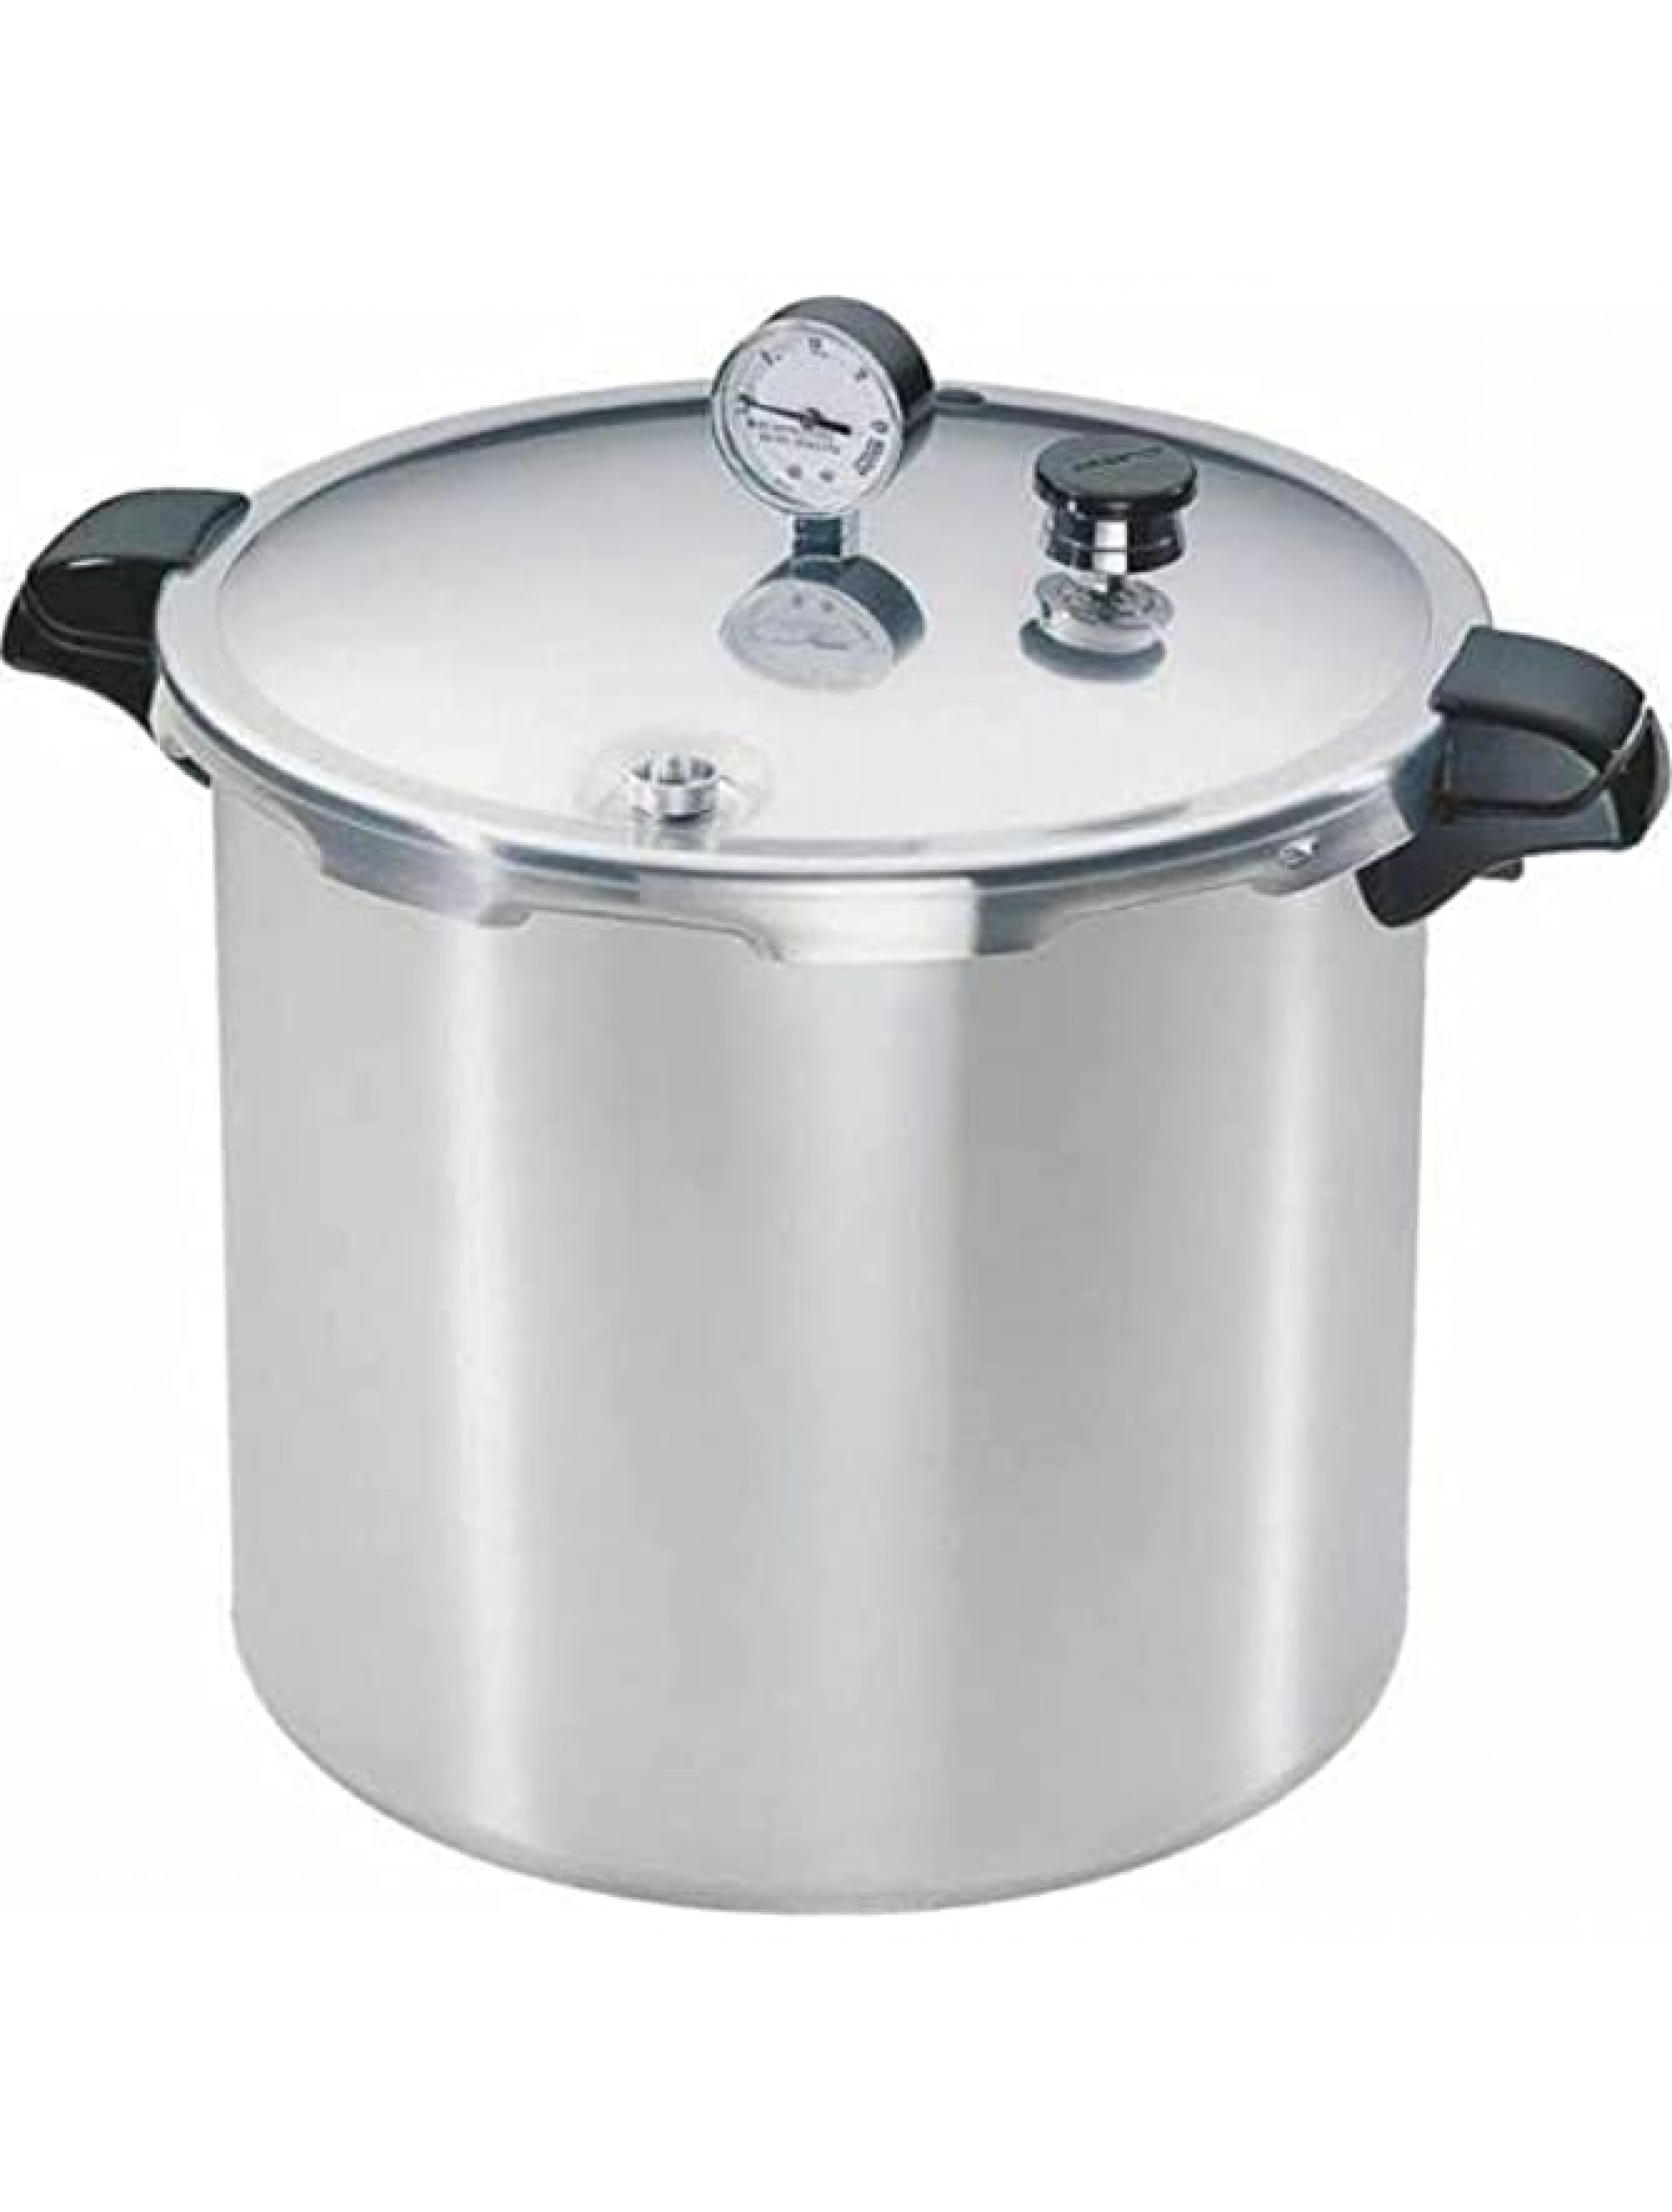 NEW FOR PRESTO 01781 PRESSURE CANNER COOKER 23 QUART NEW IN BOX SALE - BT7M0NZXE